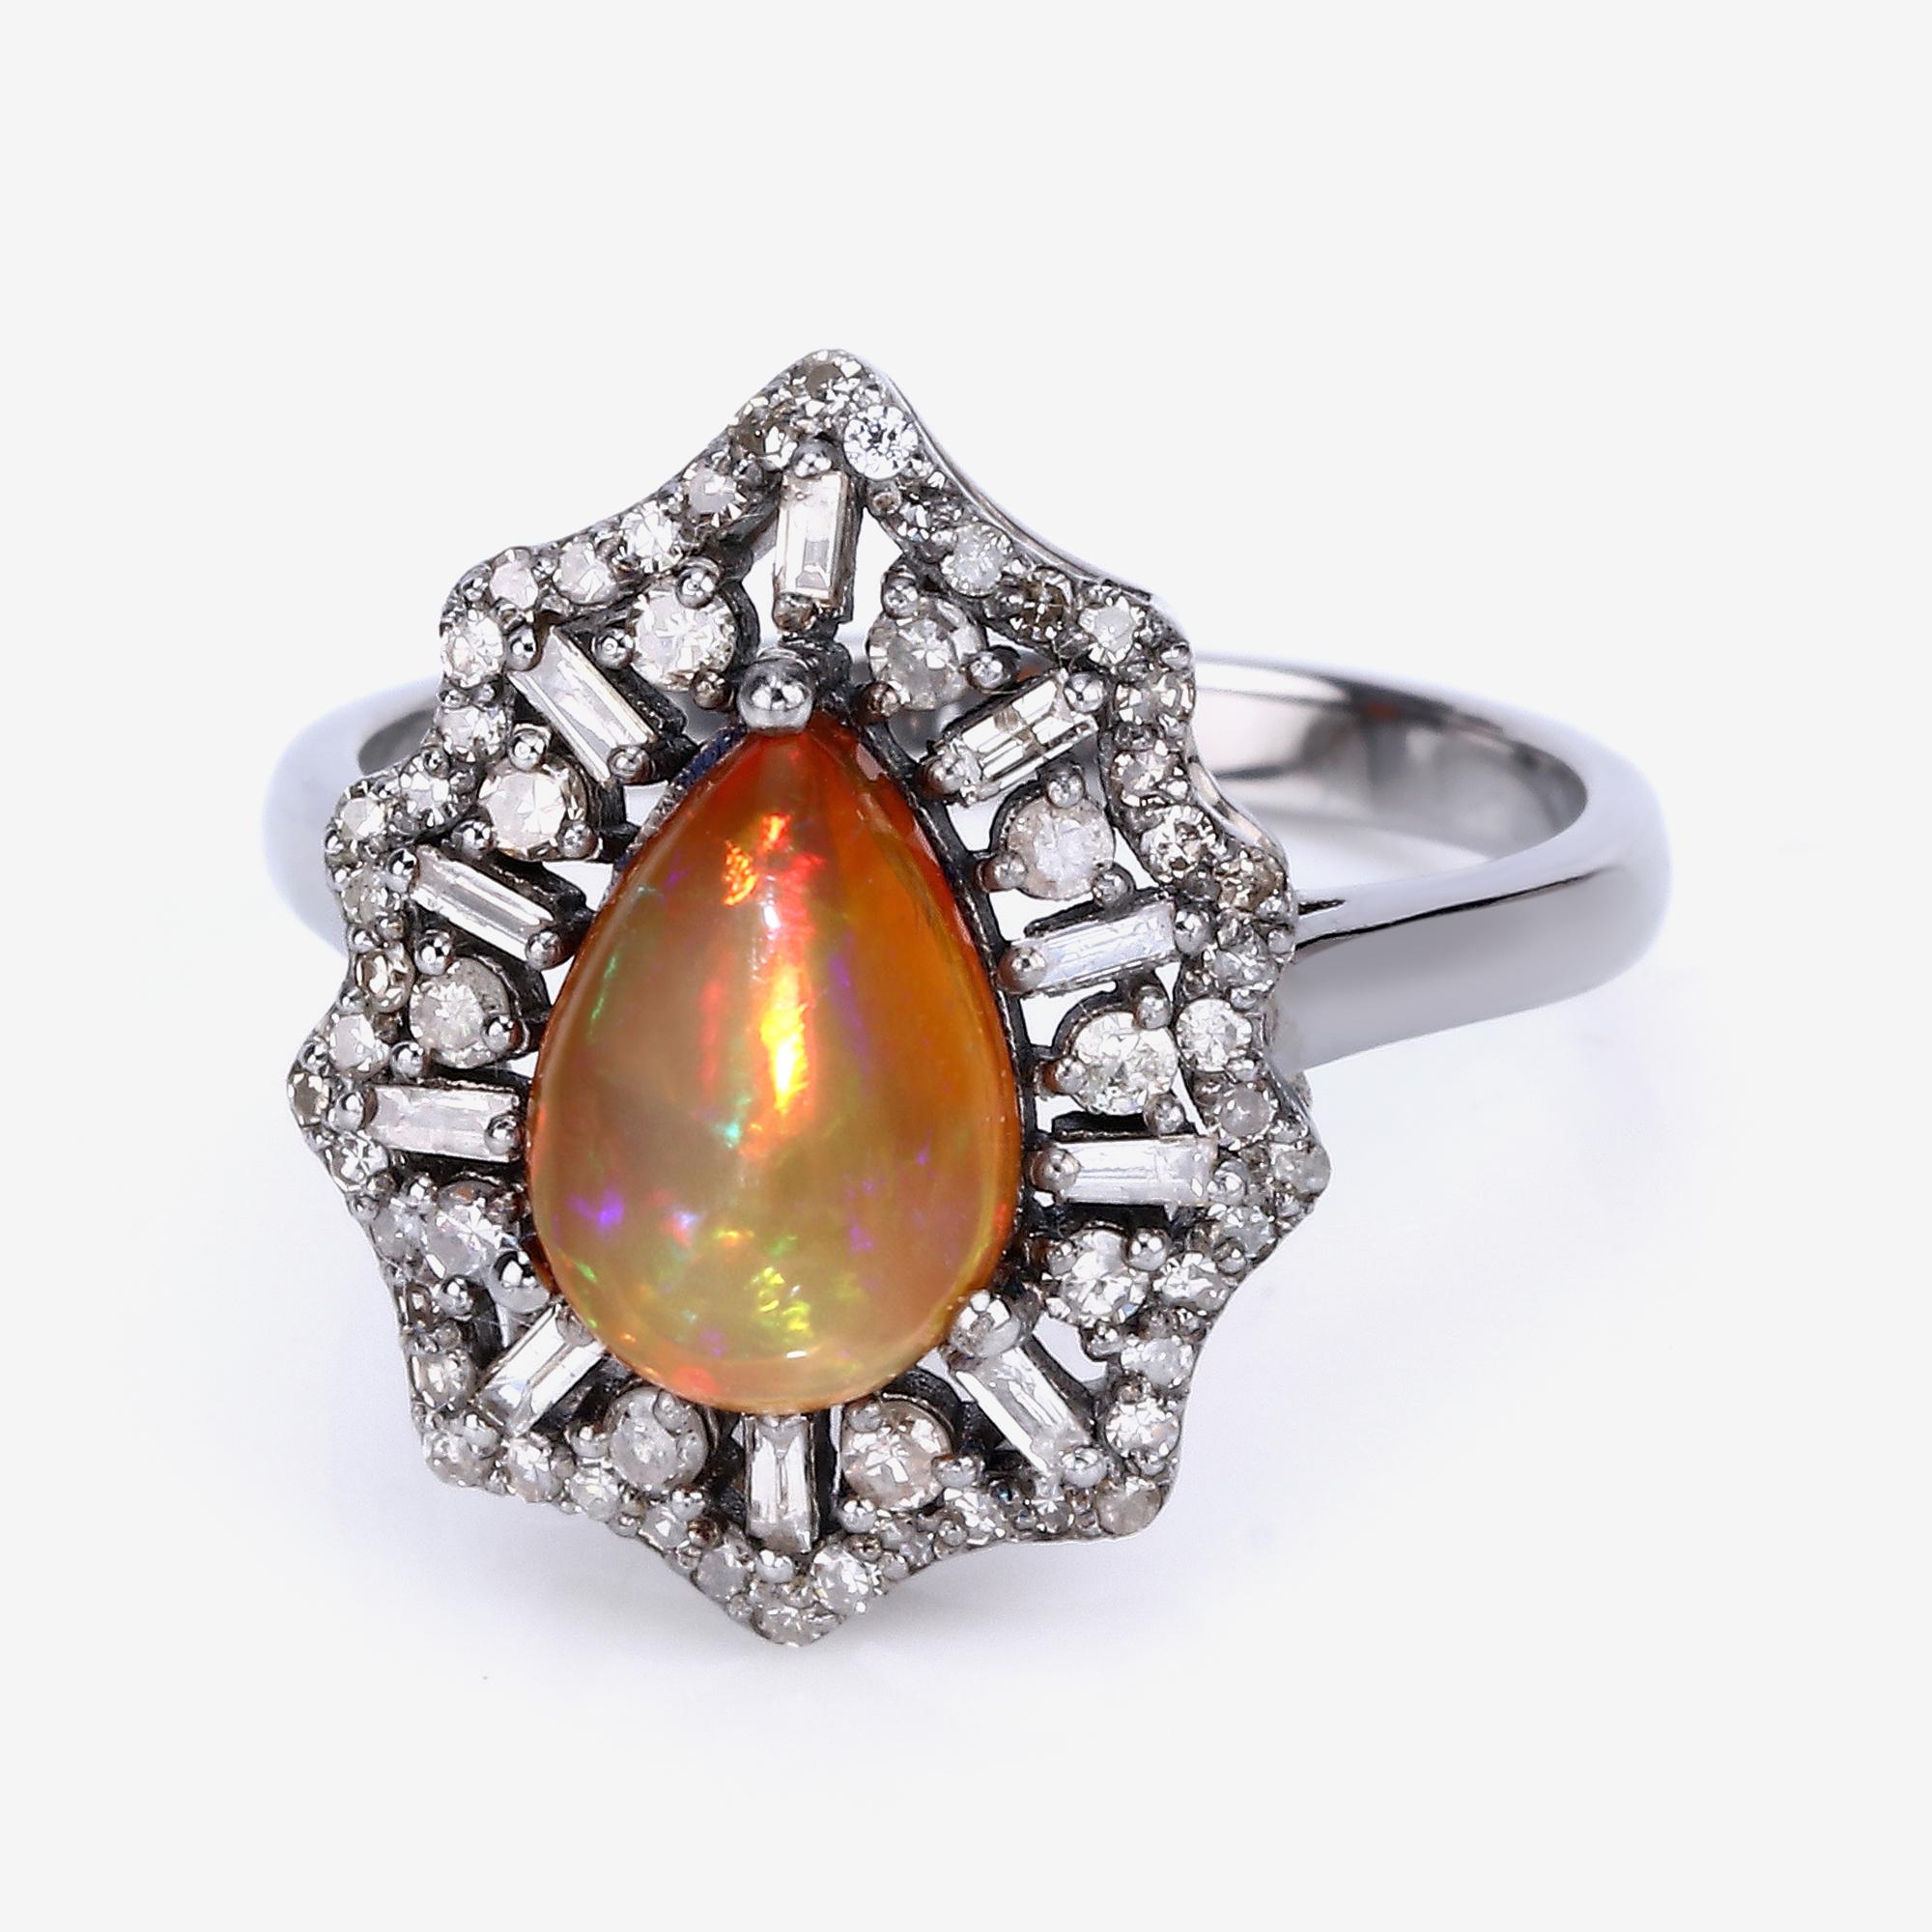 Women's 1.30cttw Ethiopian Opal with Diamonds 0.66cttw Sterling Silver Ring